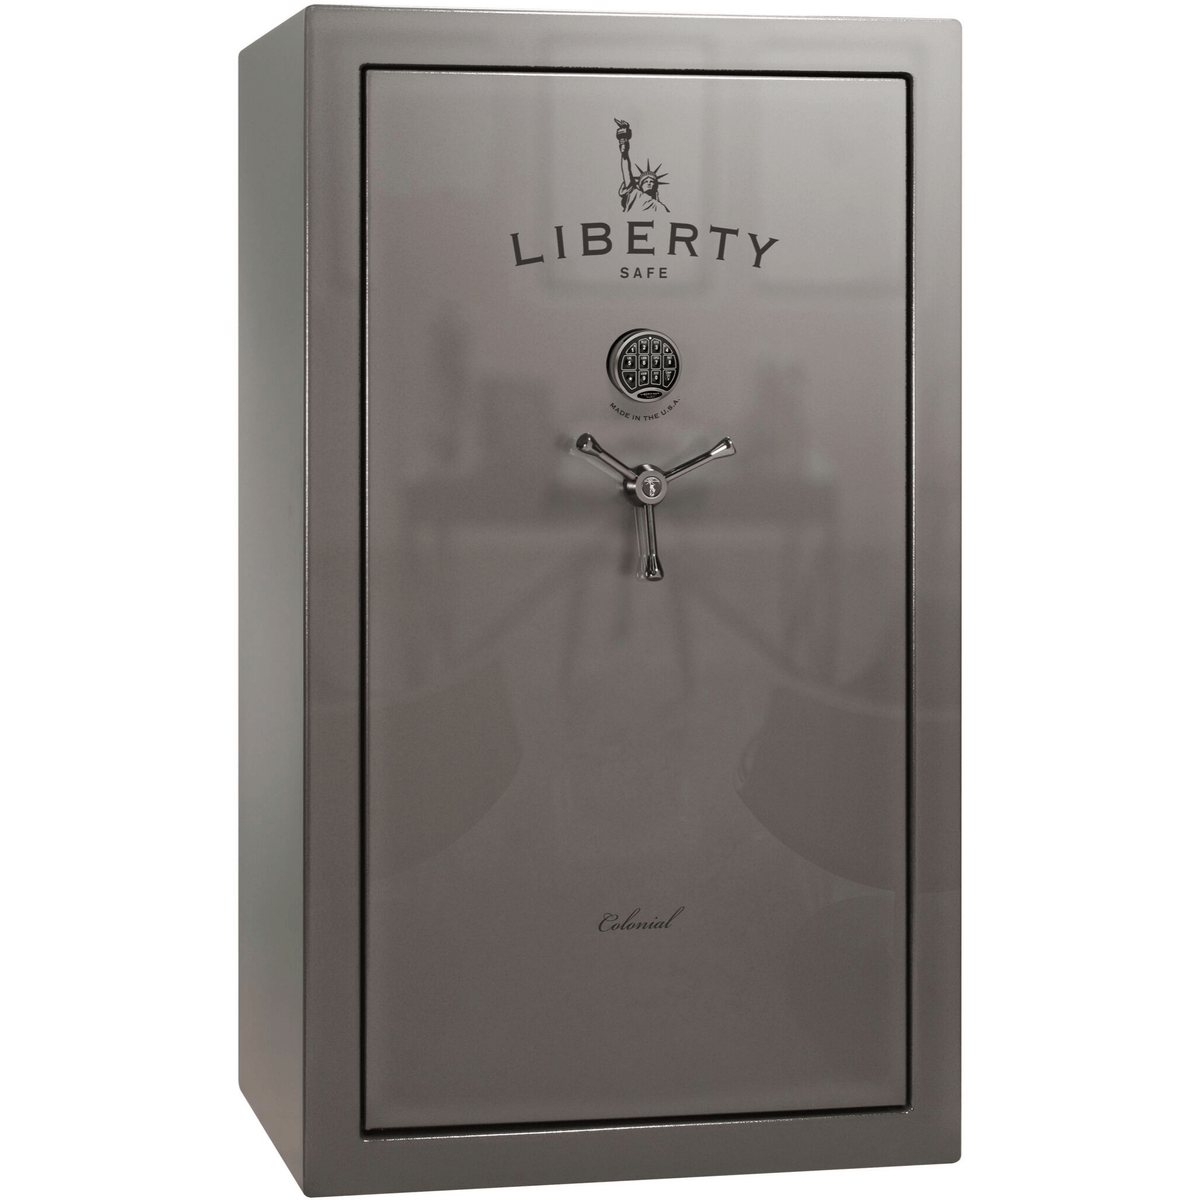 Liberty Colonial 30 Safe in Gray Gloss with Black Chrome Electronic Lock.